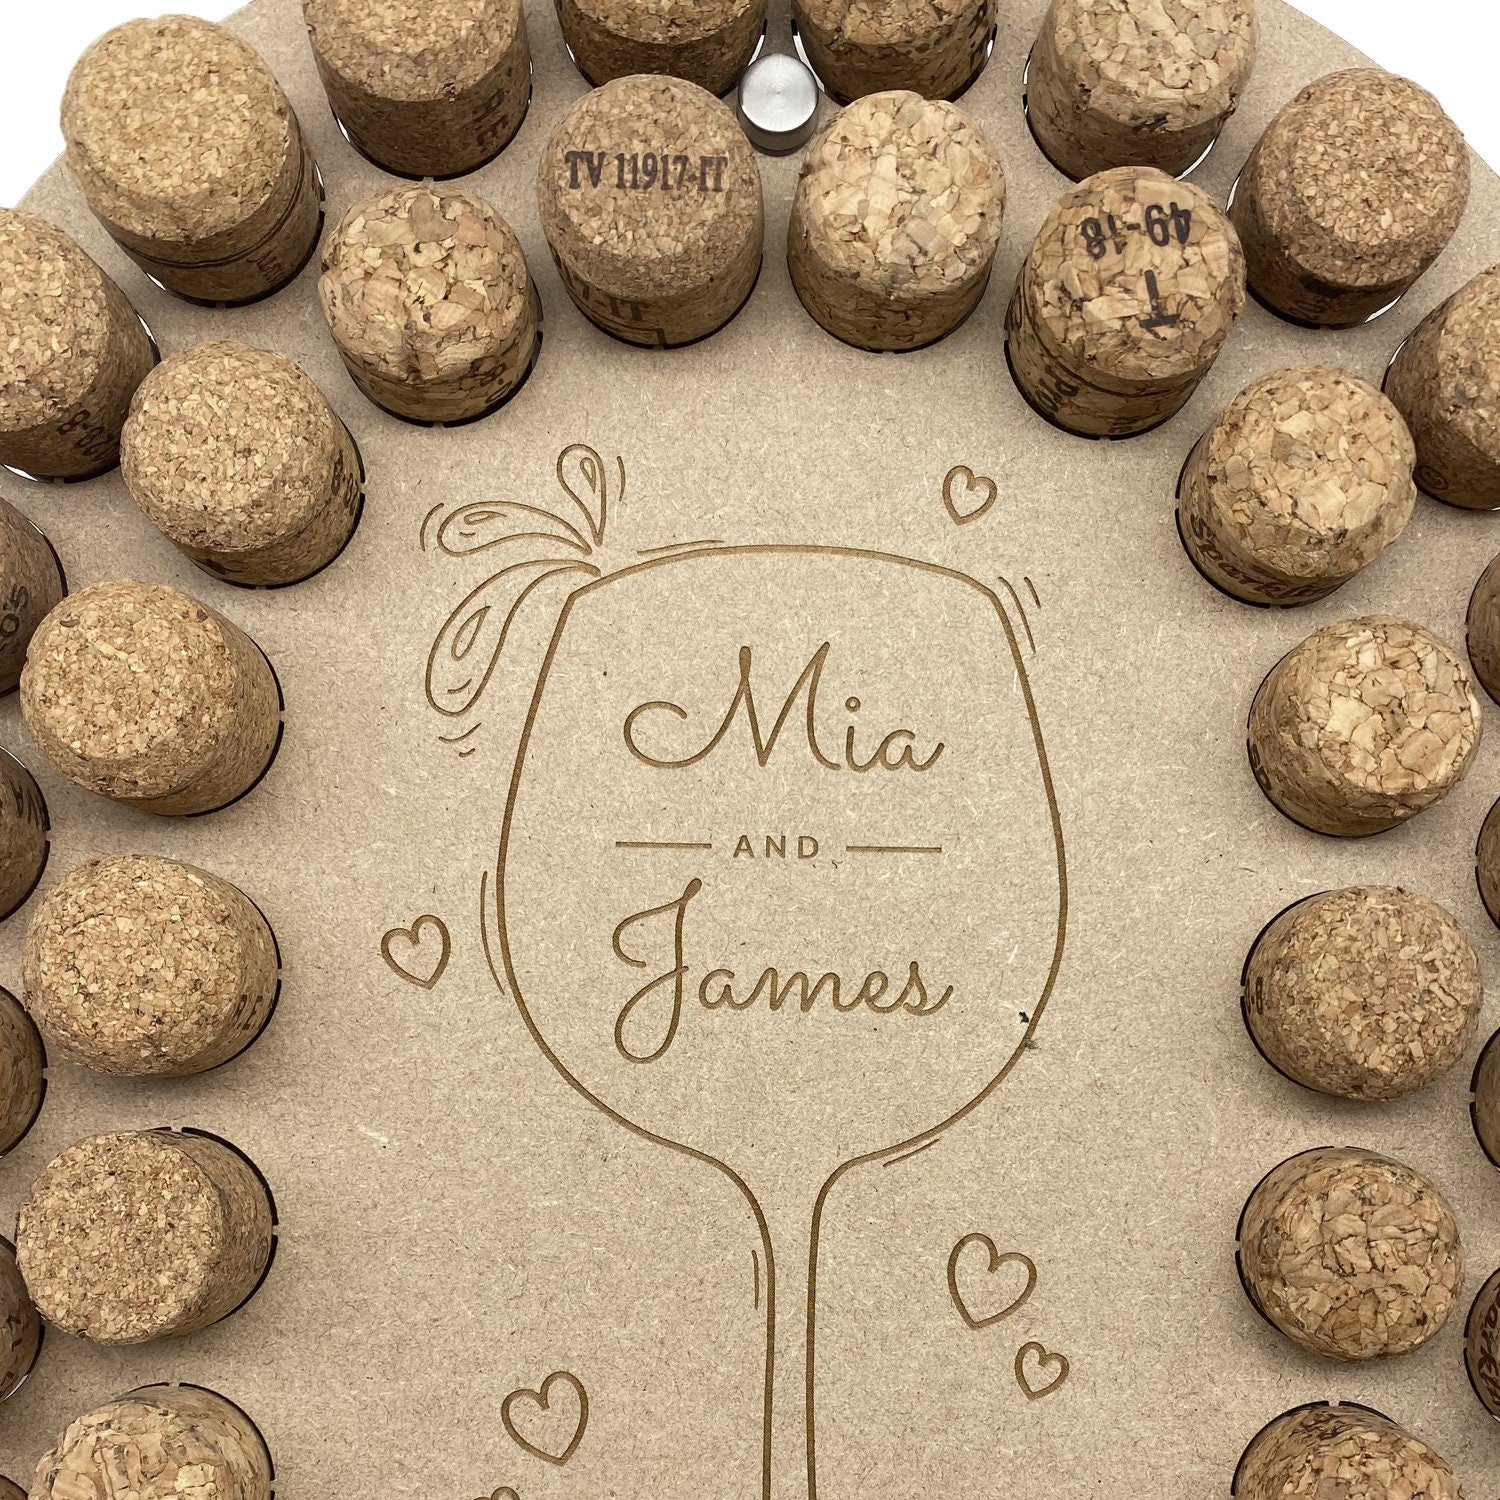 Personalised Wine Cork Collection Wall Display, Oval Shape - Ideal Wedding or Anniversary Gift